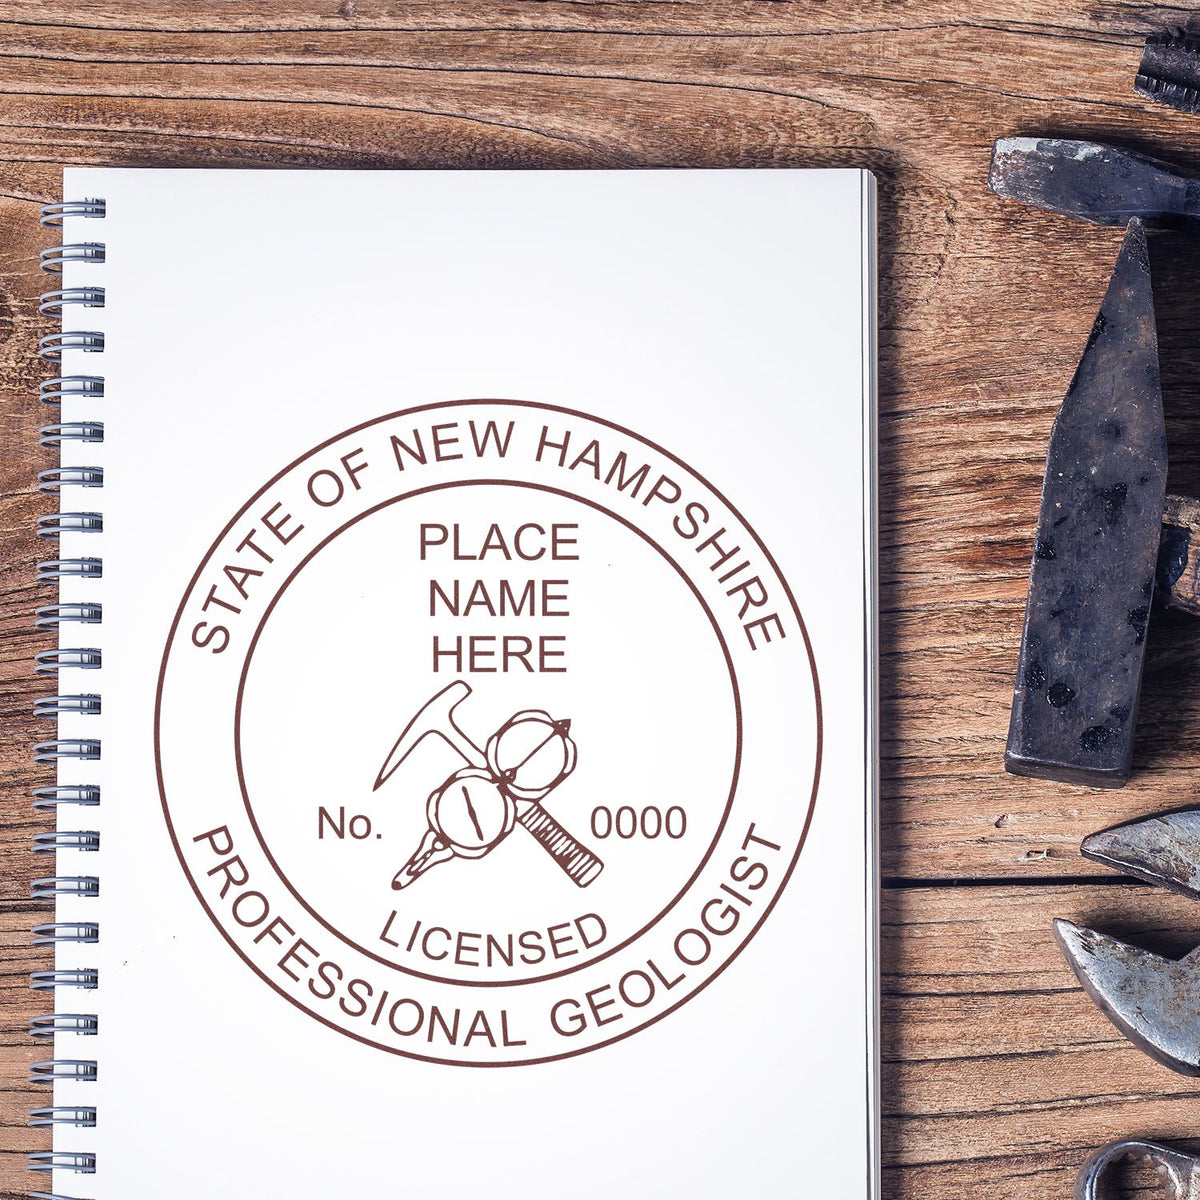 Another Example of a stamped impression of the New Hampshire Professional Geologist Seal Stamp on a office form